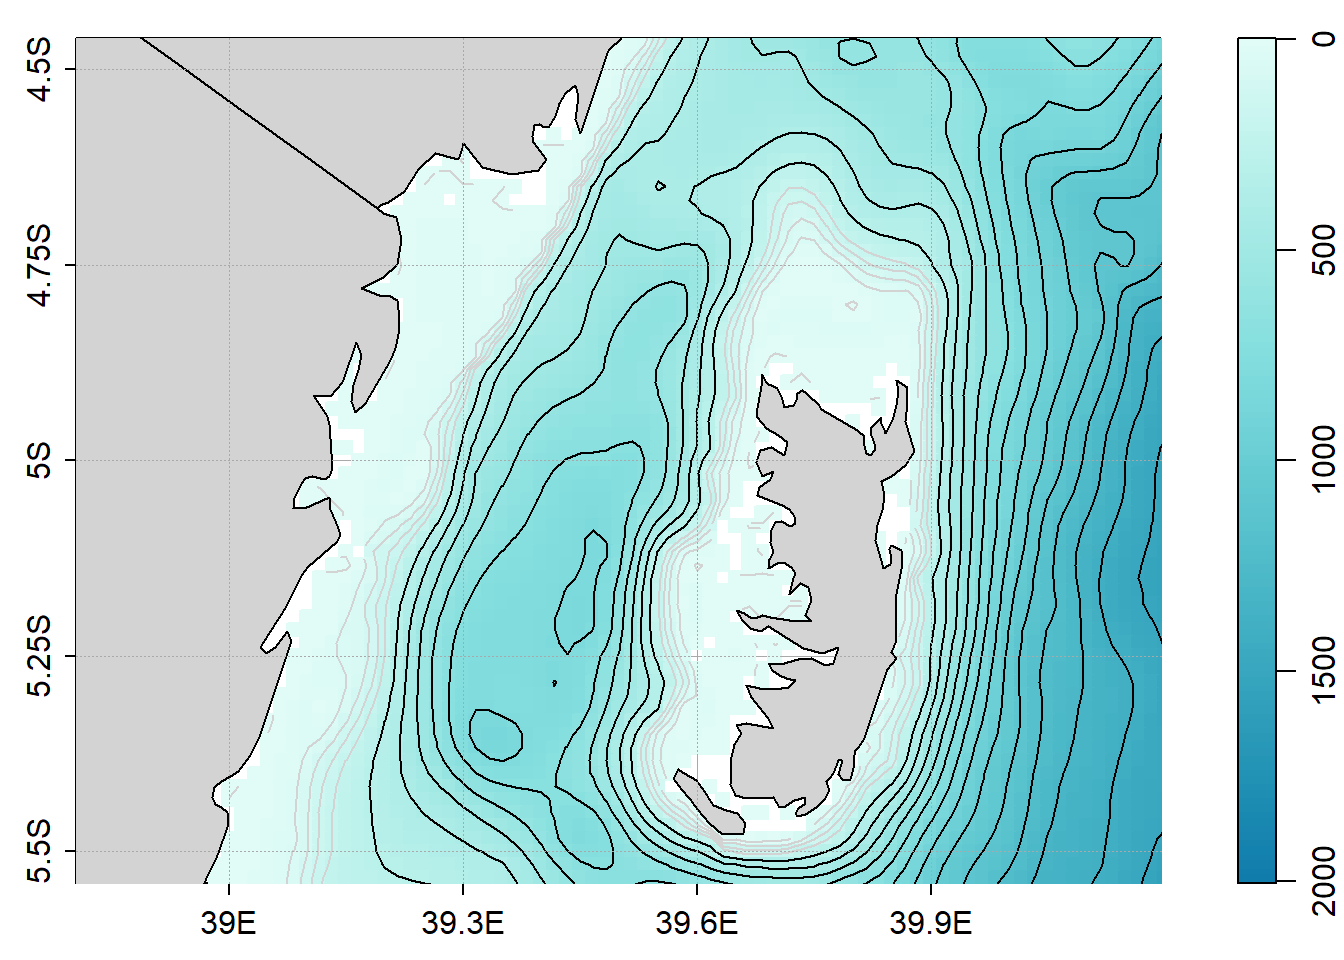 Bathymetric map of Pemba channel. The black lines are contour interval of 100 meters and the grey line are contour interval of 50 meters.